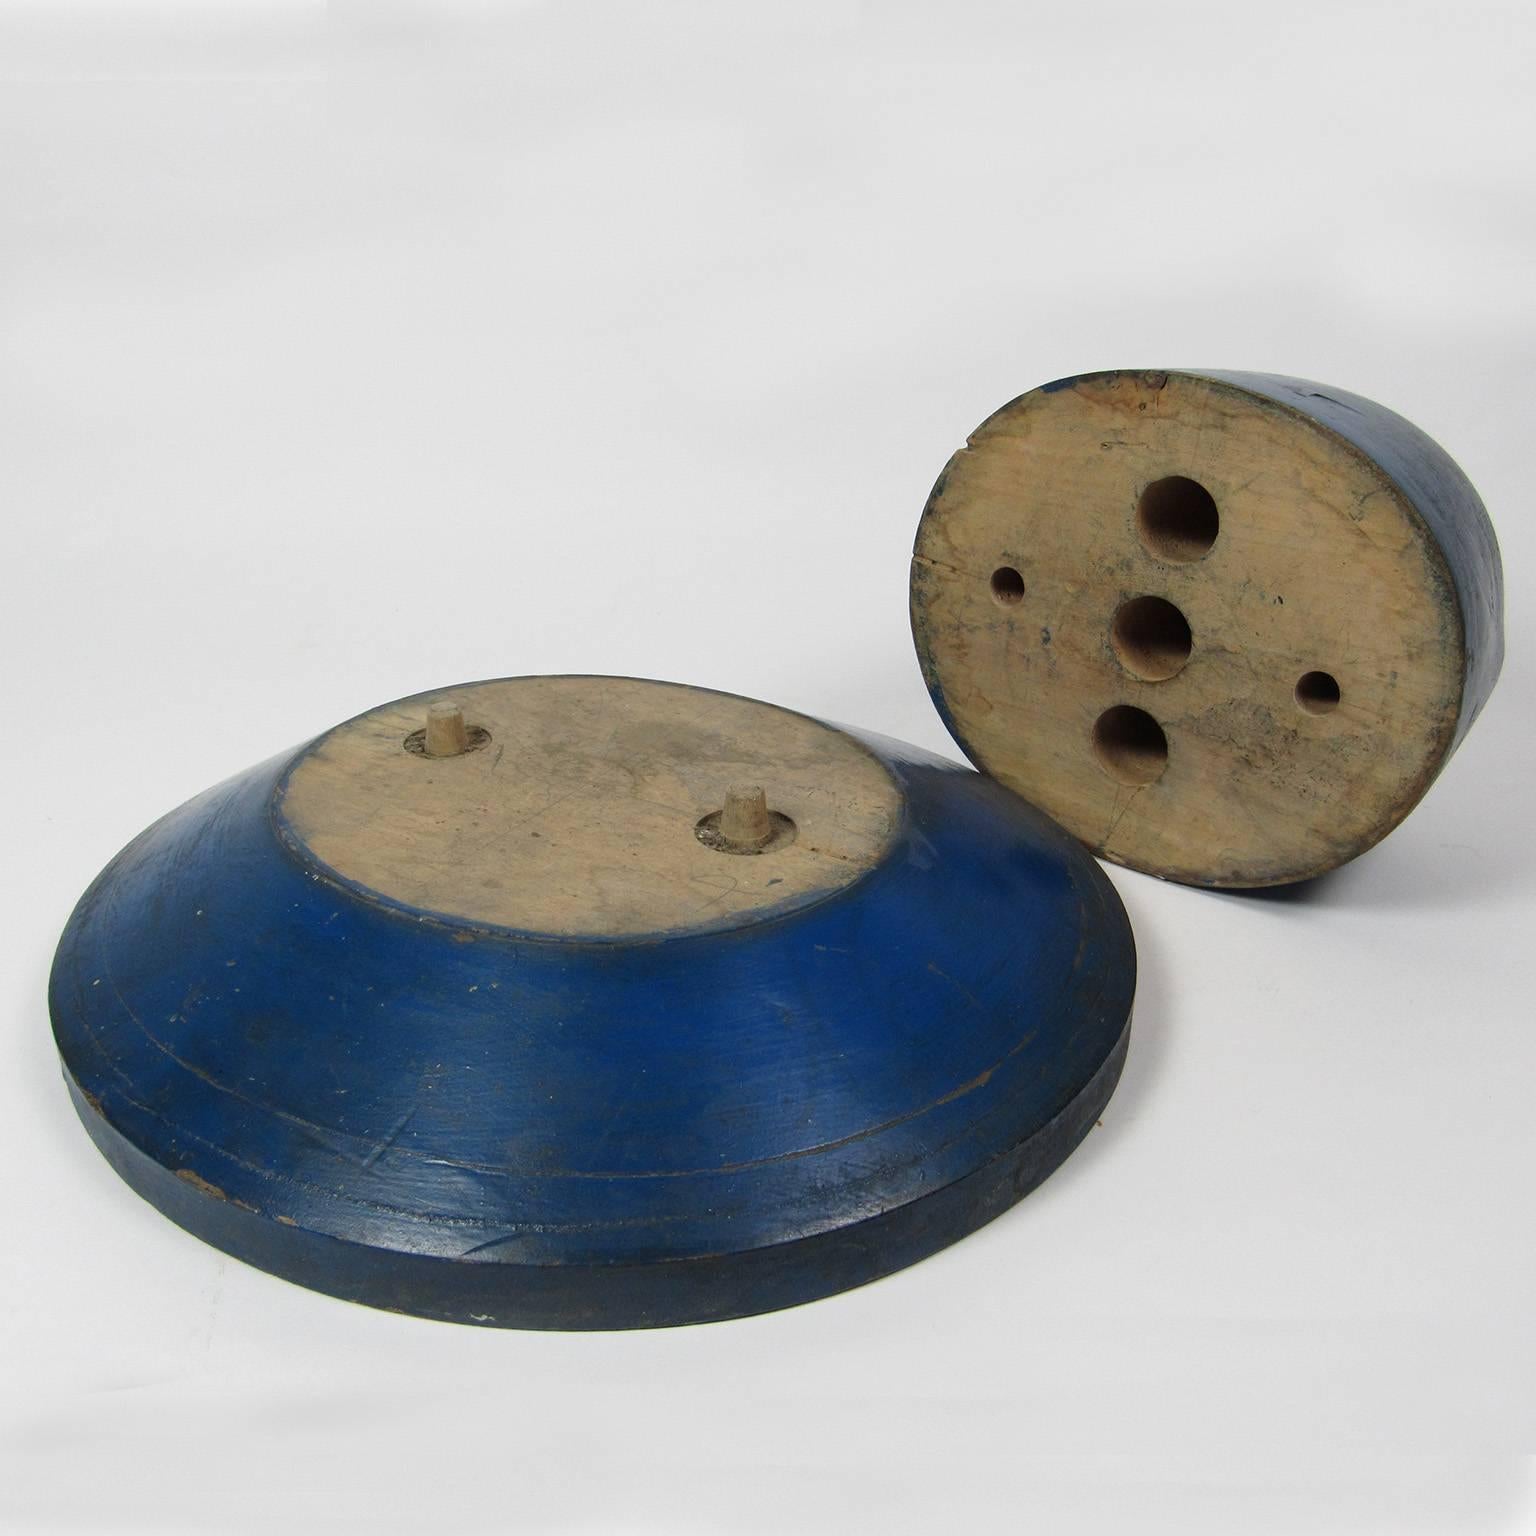 Rare blue painted hat block, late 19th-early 20th century; in two parts, marked 